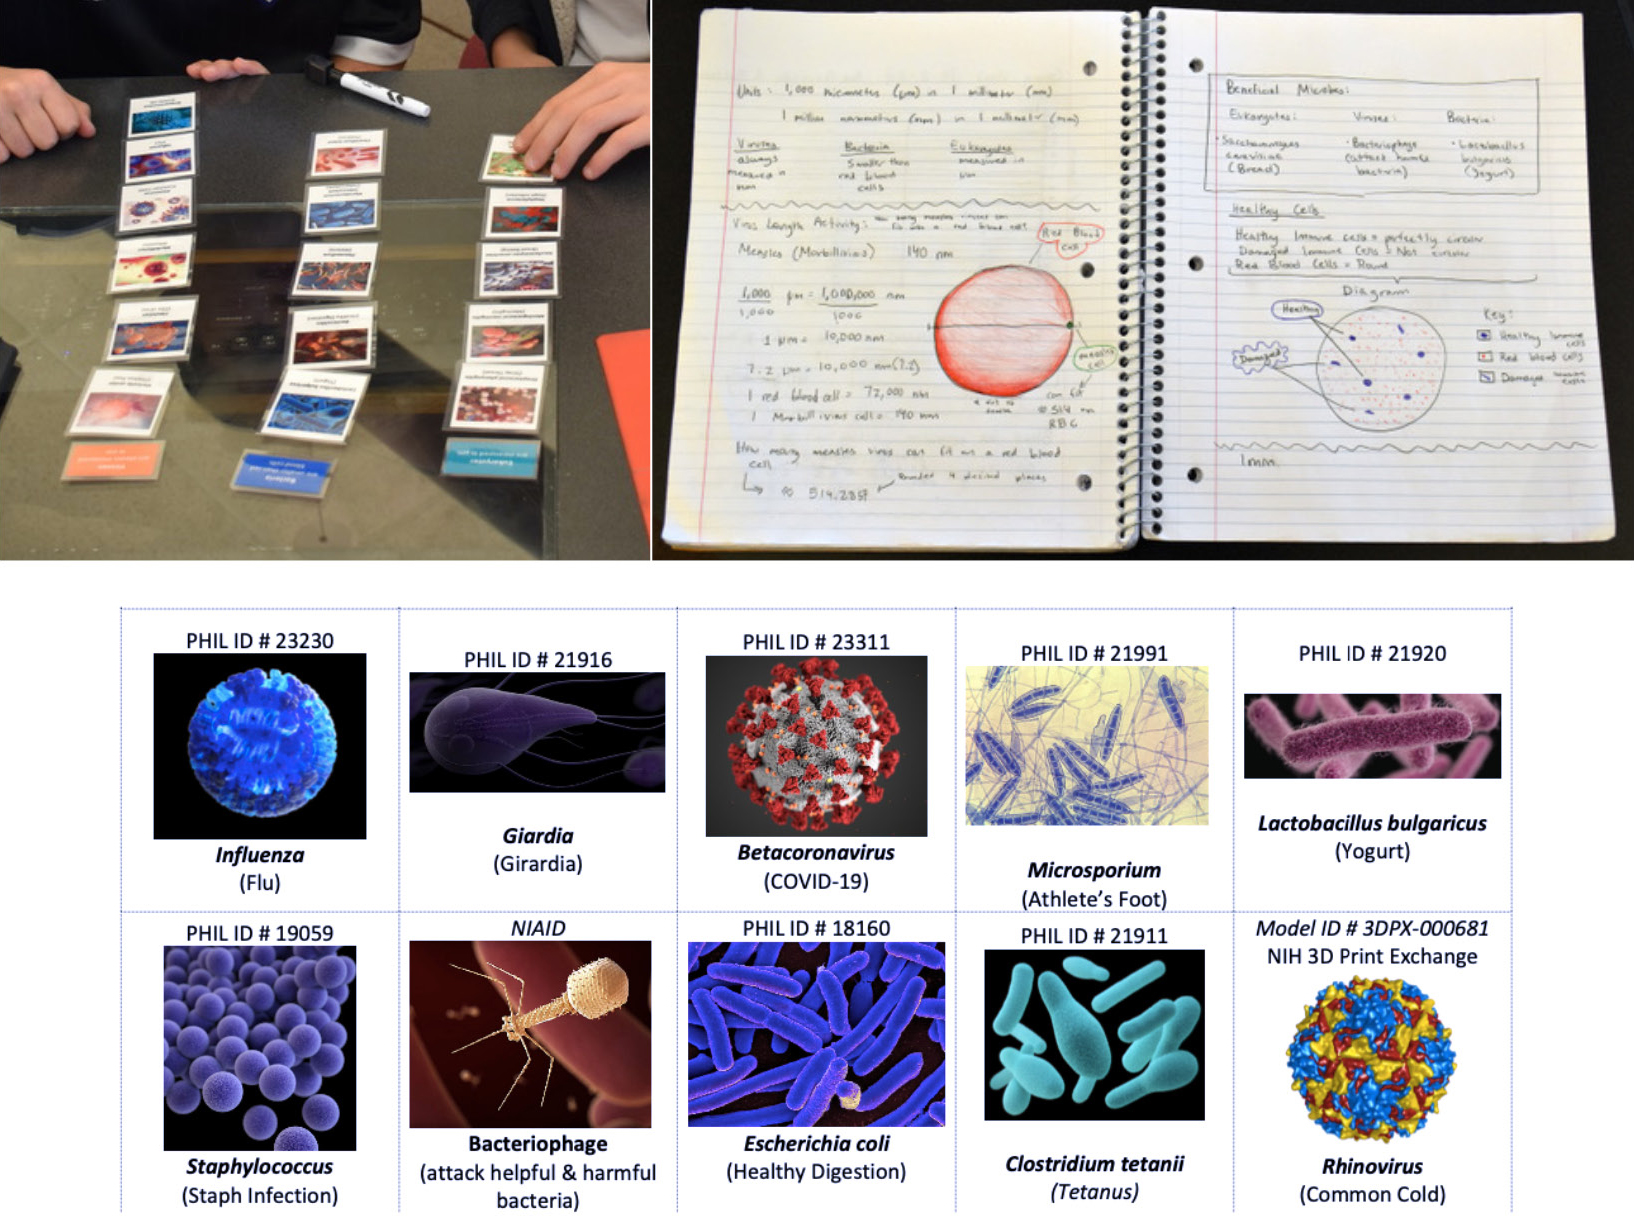 Students work through the microbe sorting activity, for which a close-up snapshot of some of the cards can also be seen. Student work shows drawings of Epstein-Barr infected white blood cells as compared to healthy blood cells.